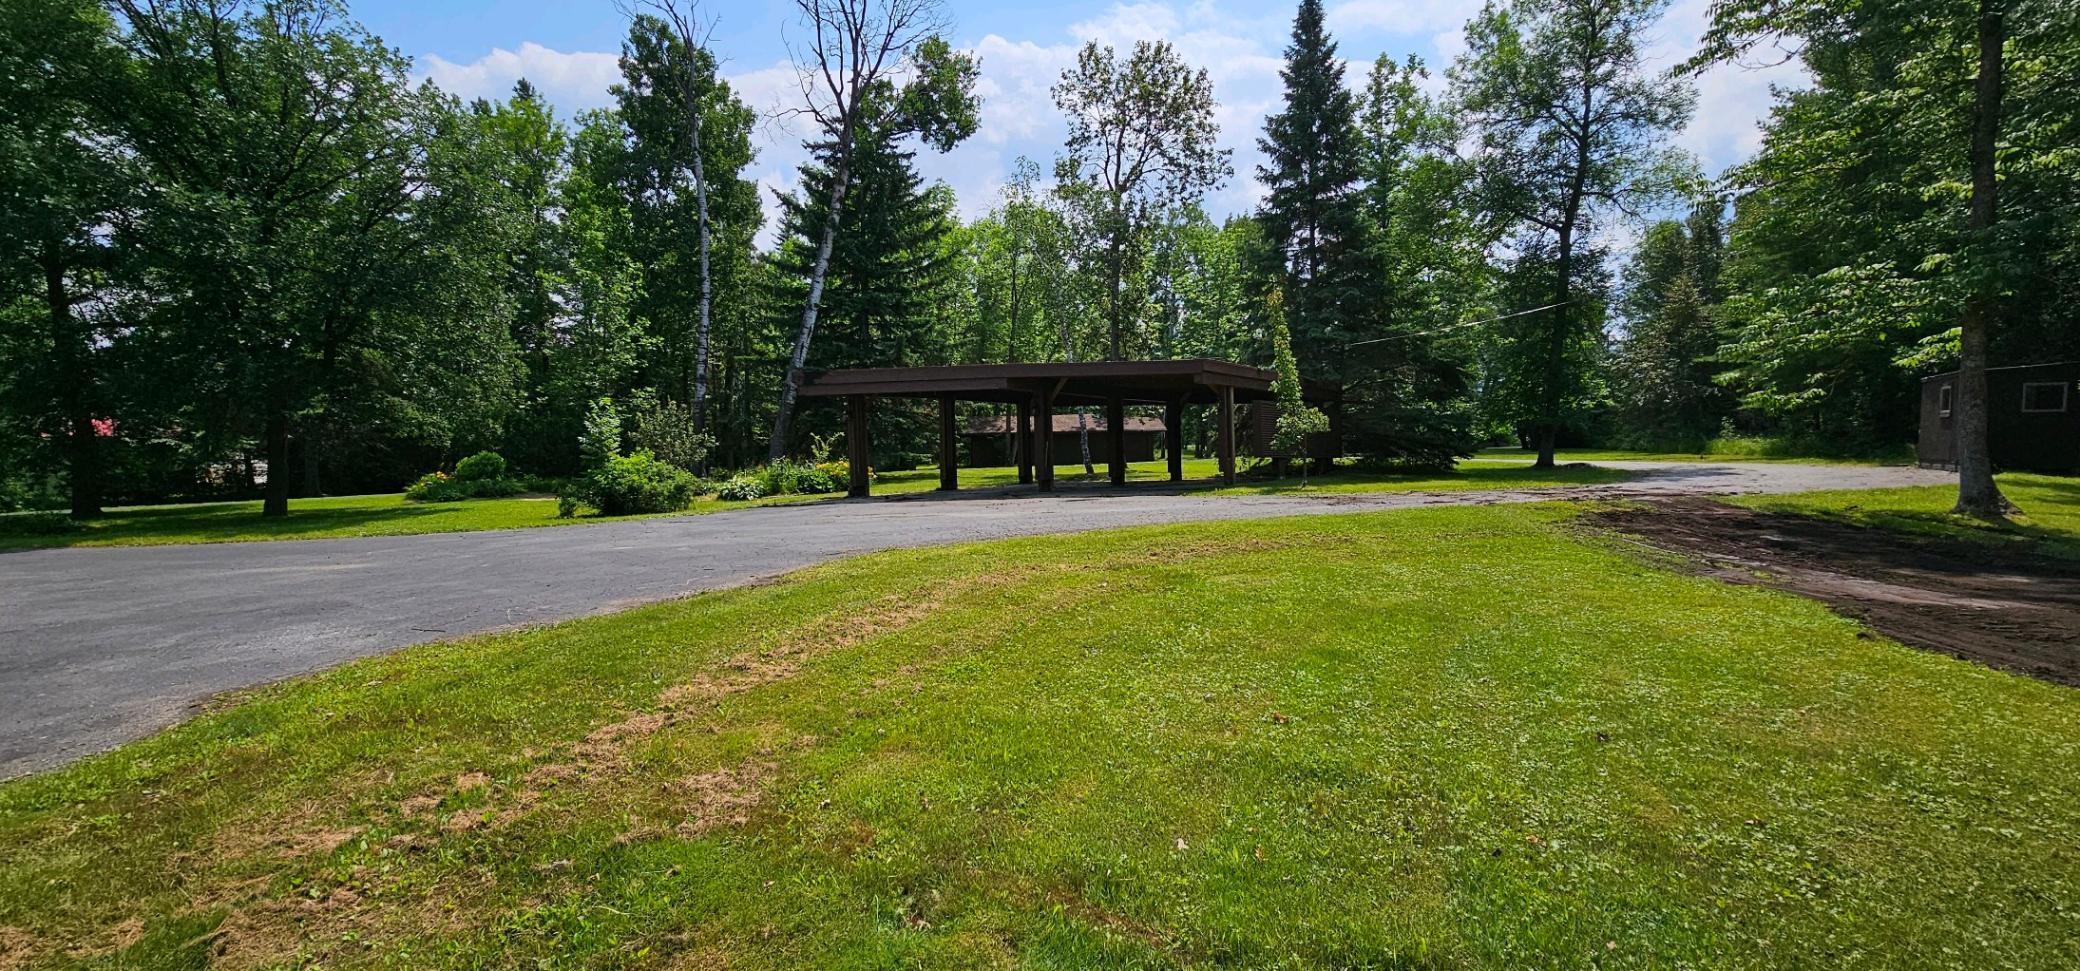 View looking out toward the highway. Carport for two cars, two sheds on each side of the property (not in pics) and to the far center, two additional smaller garages.